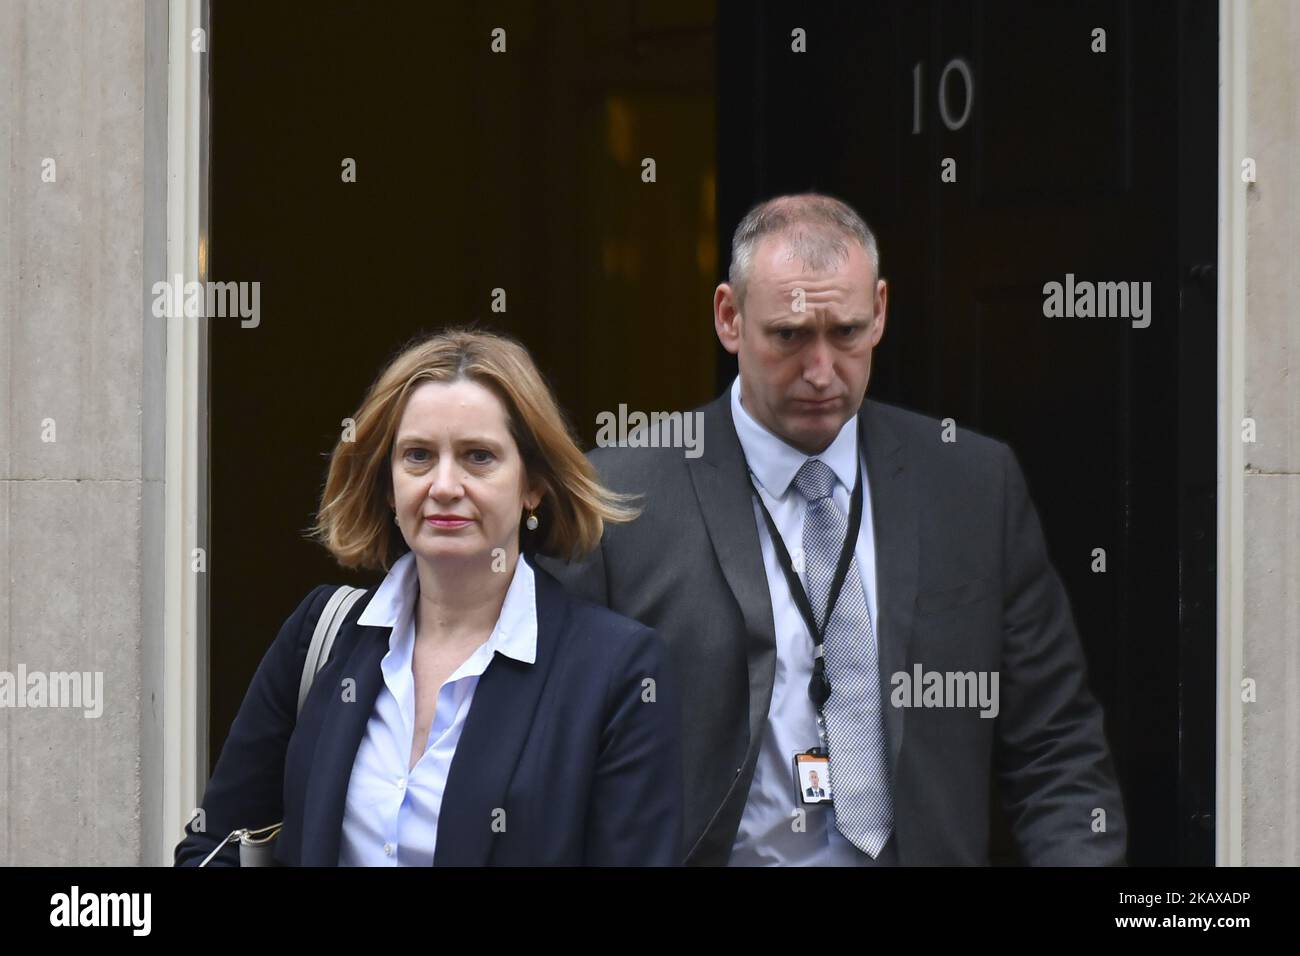 Britain's Home Secretary Amber Rudd leaves 10 Downing Street after attending the weekly Cabinet Meeting, London on March 27, 2018. Prime Minister Theresa May is facing another Brexit hurdle after the opposition Labour Party announced its pushing for a legal commitment to avoid a hard border with Ireland after Britain leaves the European Union. The Migration Advisory Committee (MAC) said businesses are concerned about their ability to recruit workers from the EU after Britain leaves the EU. UK employers also see EU workers as 'more reliable' and eager than their British counterparts, the report Stock Photo